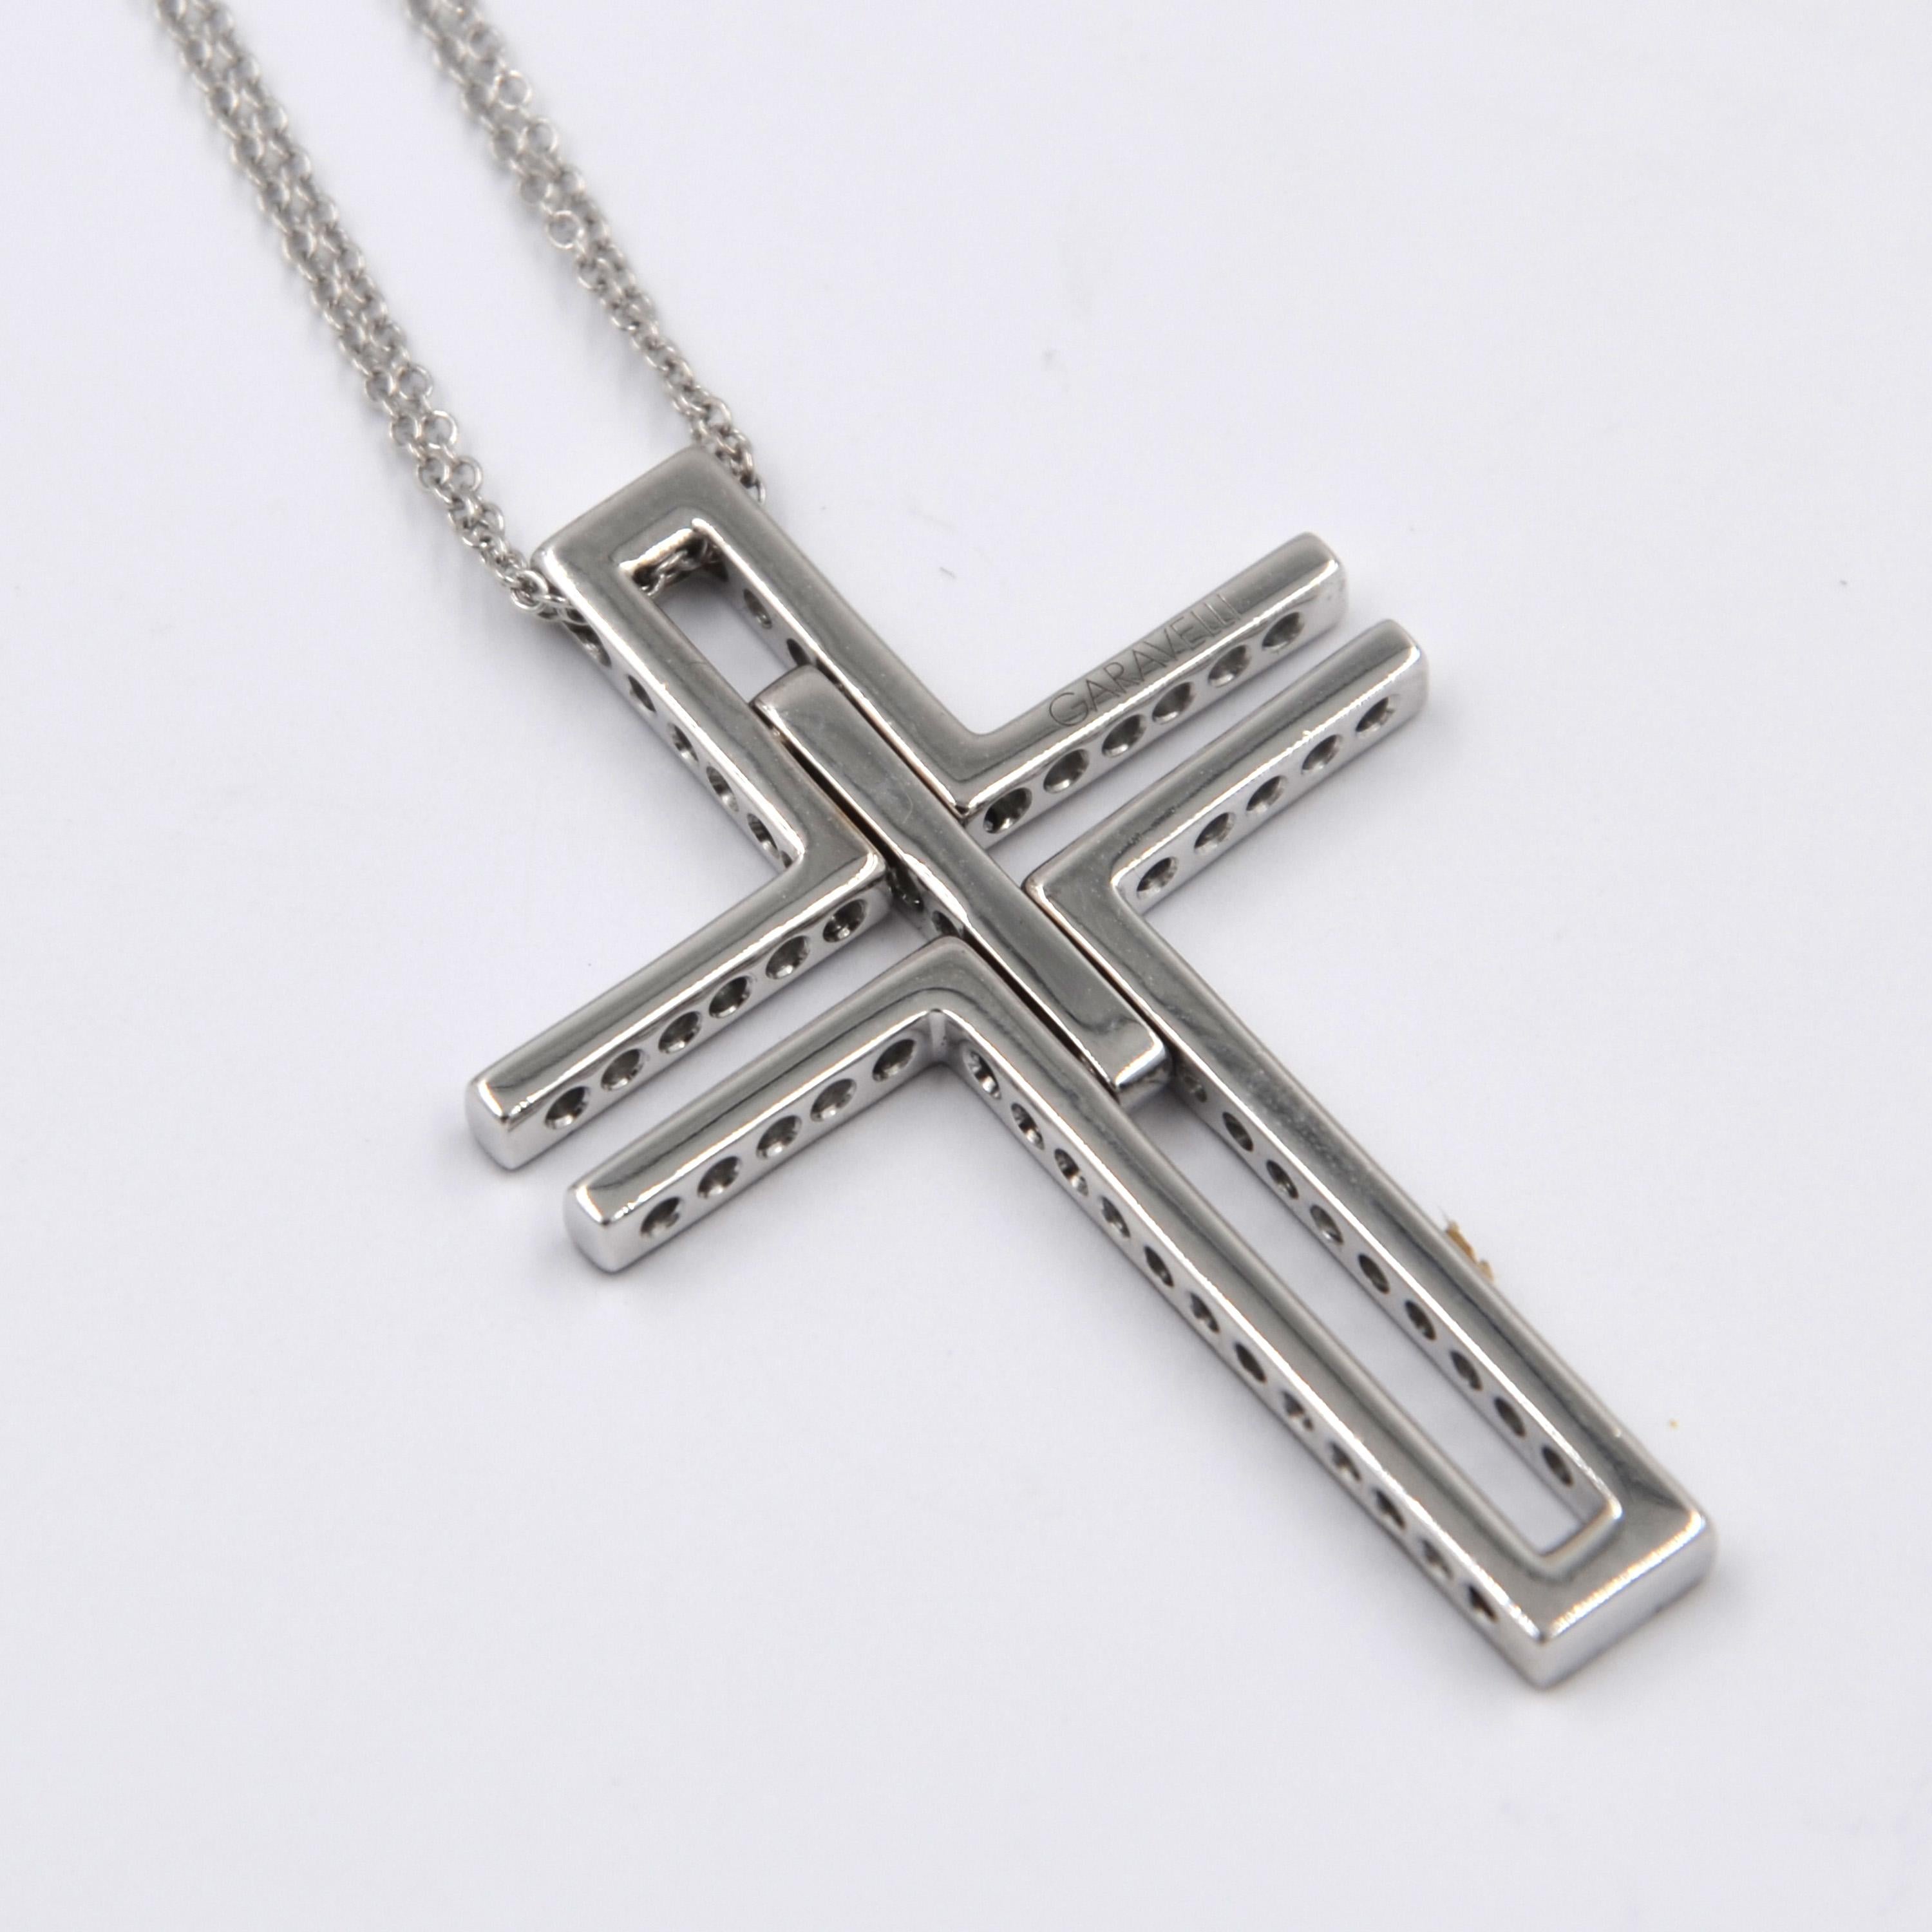 18KT White Gold Flexible Cross Pendant with Chain set with black and white diamonds. Made in Italy by Garavelli  
 
Pendant size mm 38 lenght and 25 width.
 Chain total lenght cm 50 with a loop at 40 cm
18kt GOLD gr : 9.80
BLACK DIAMONDS ct